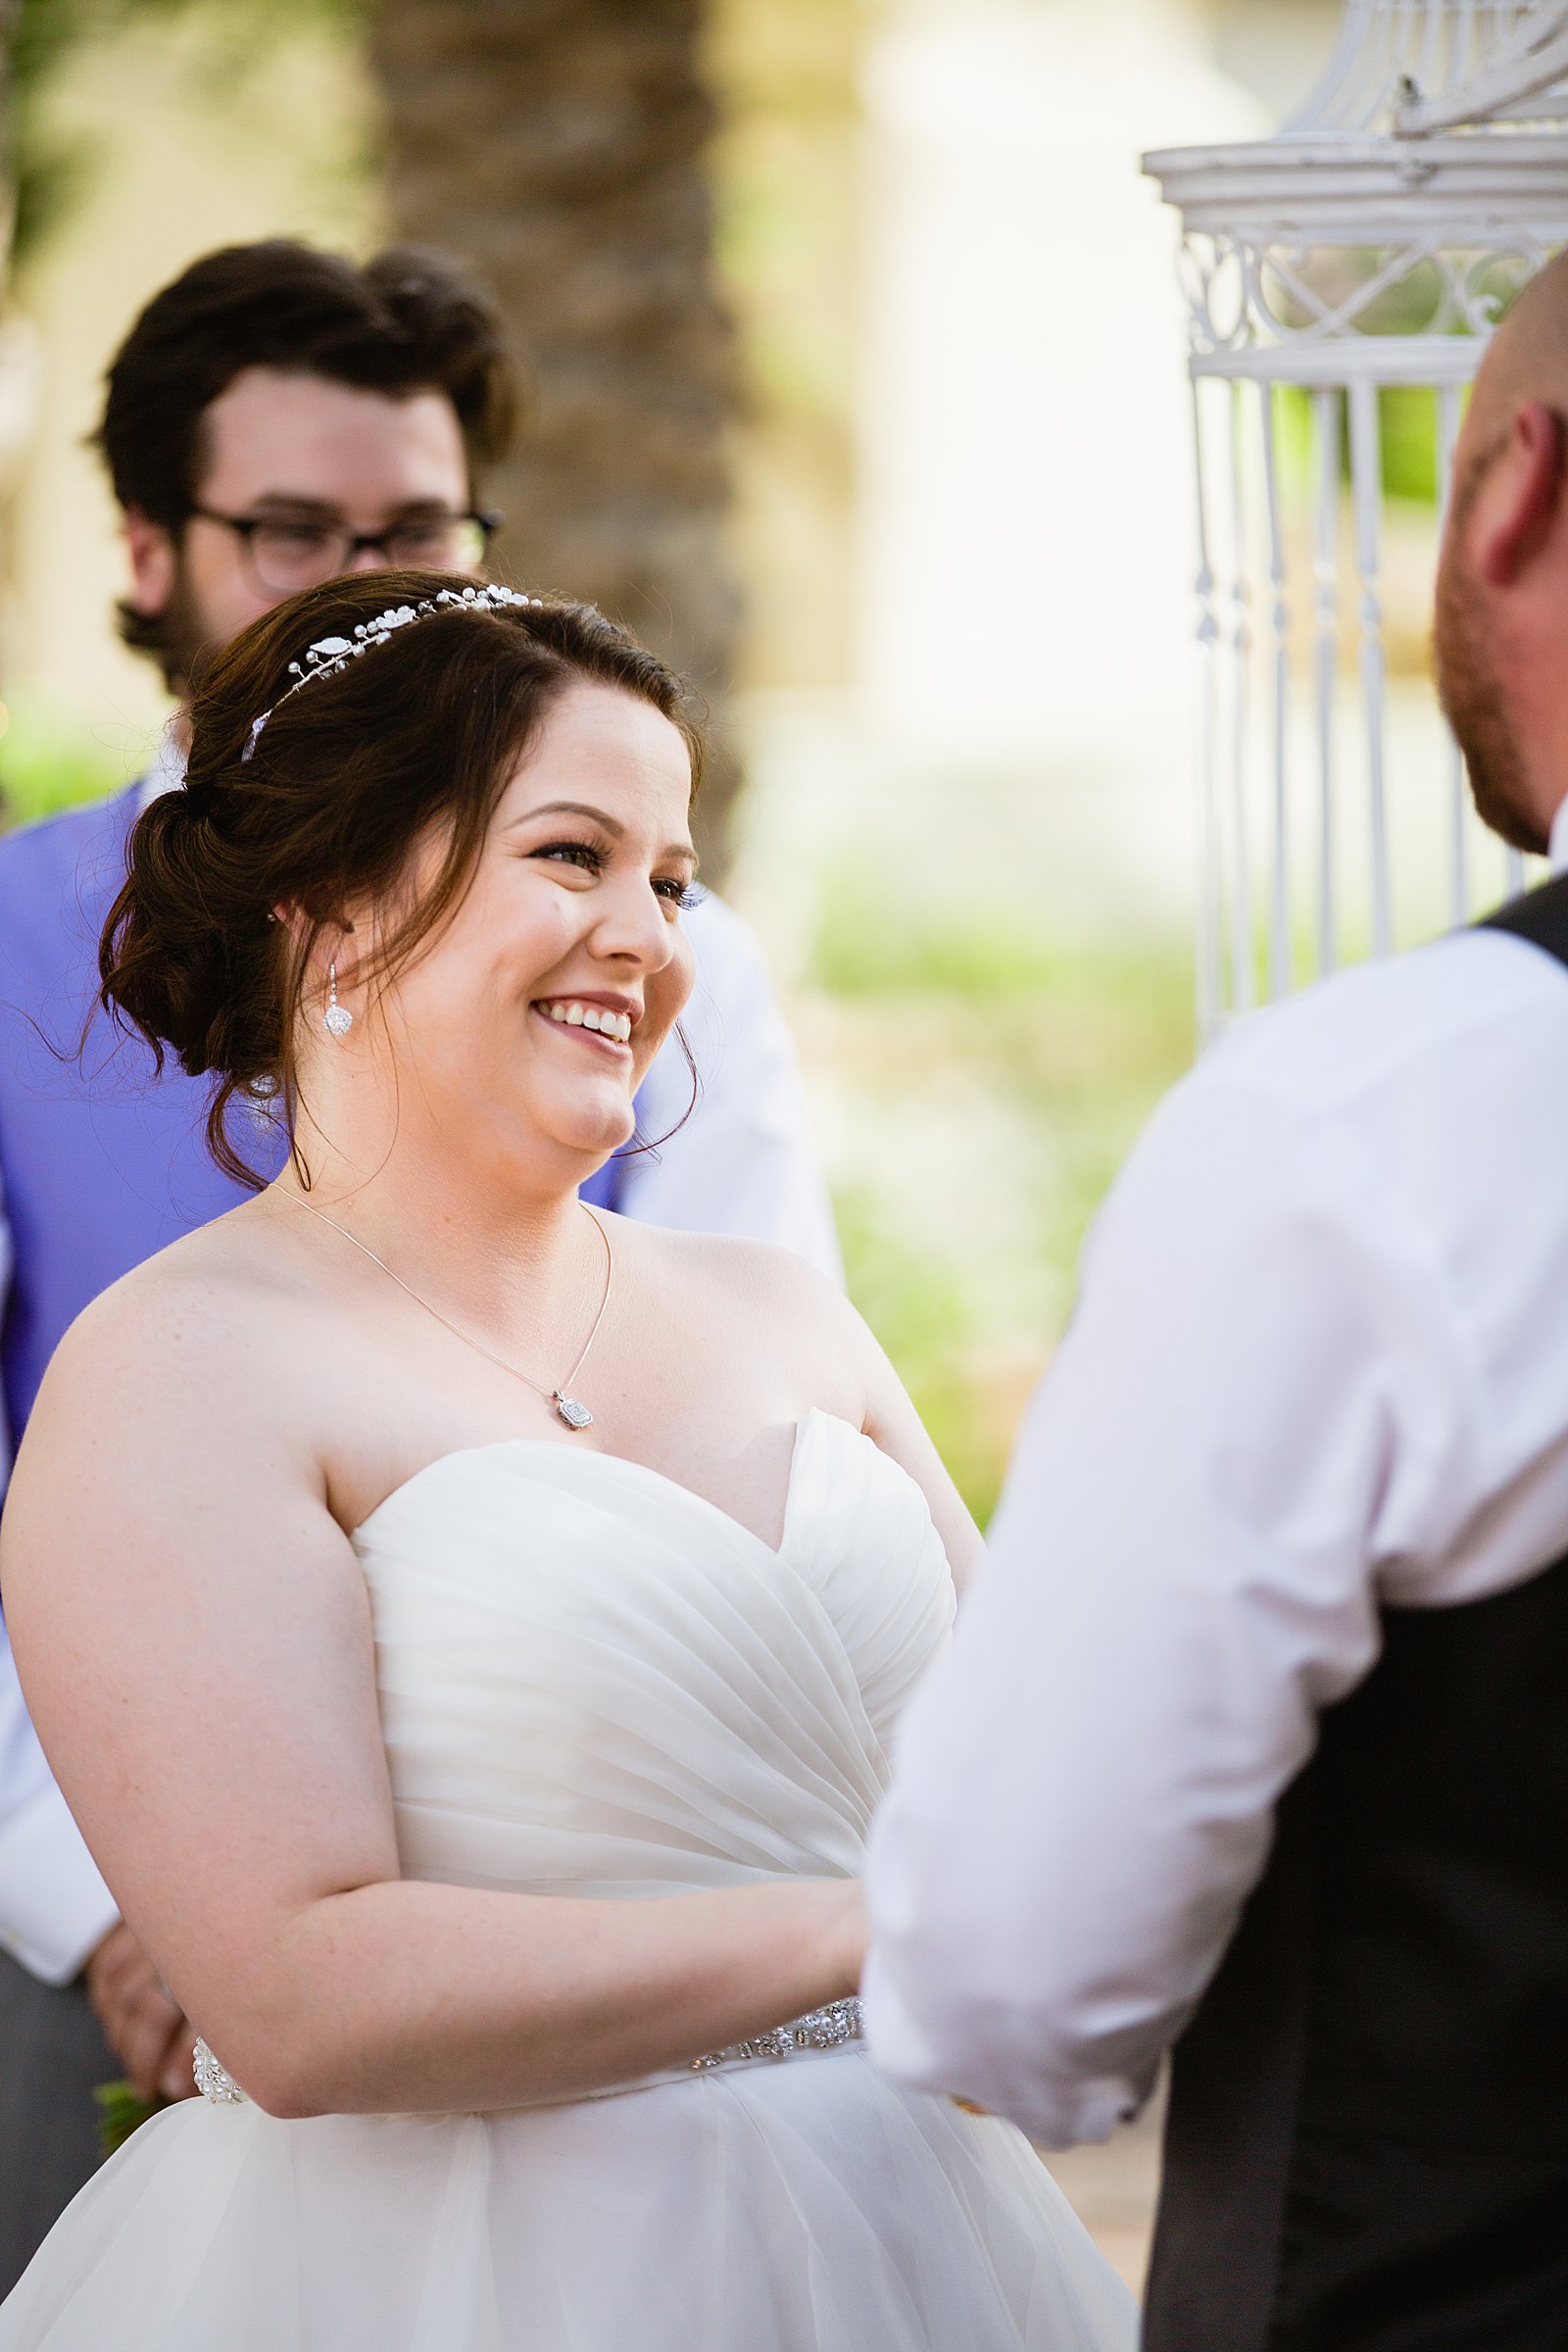 Bride looking at her groom during their wedding ceremony at Arizona Grand Resort by Phoenix wedding photographer PMA Photography.